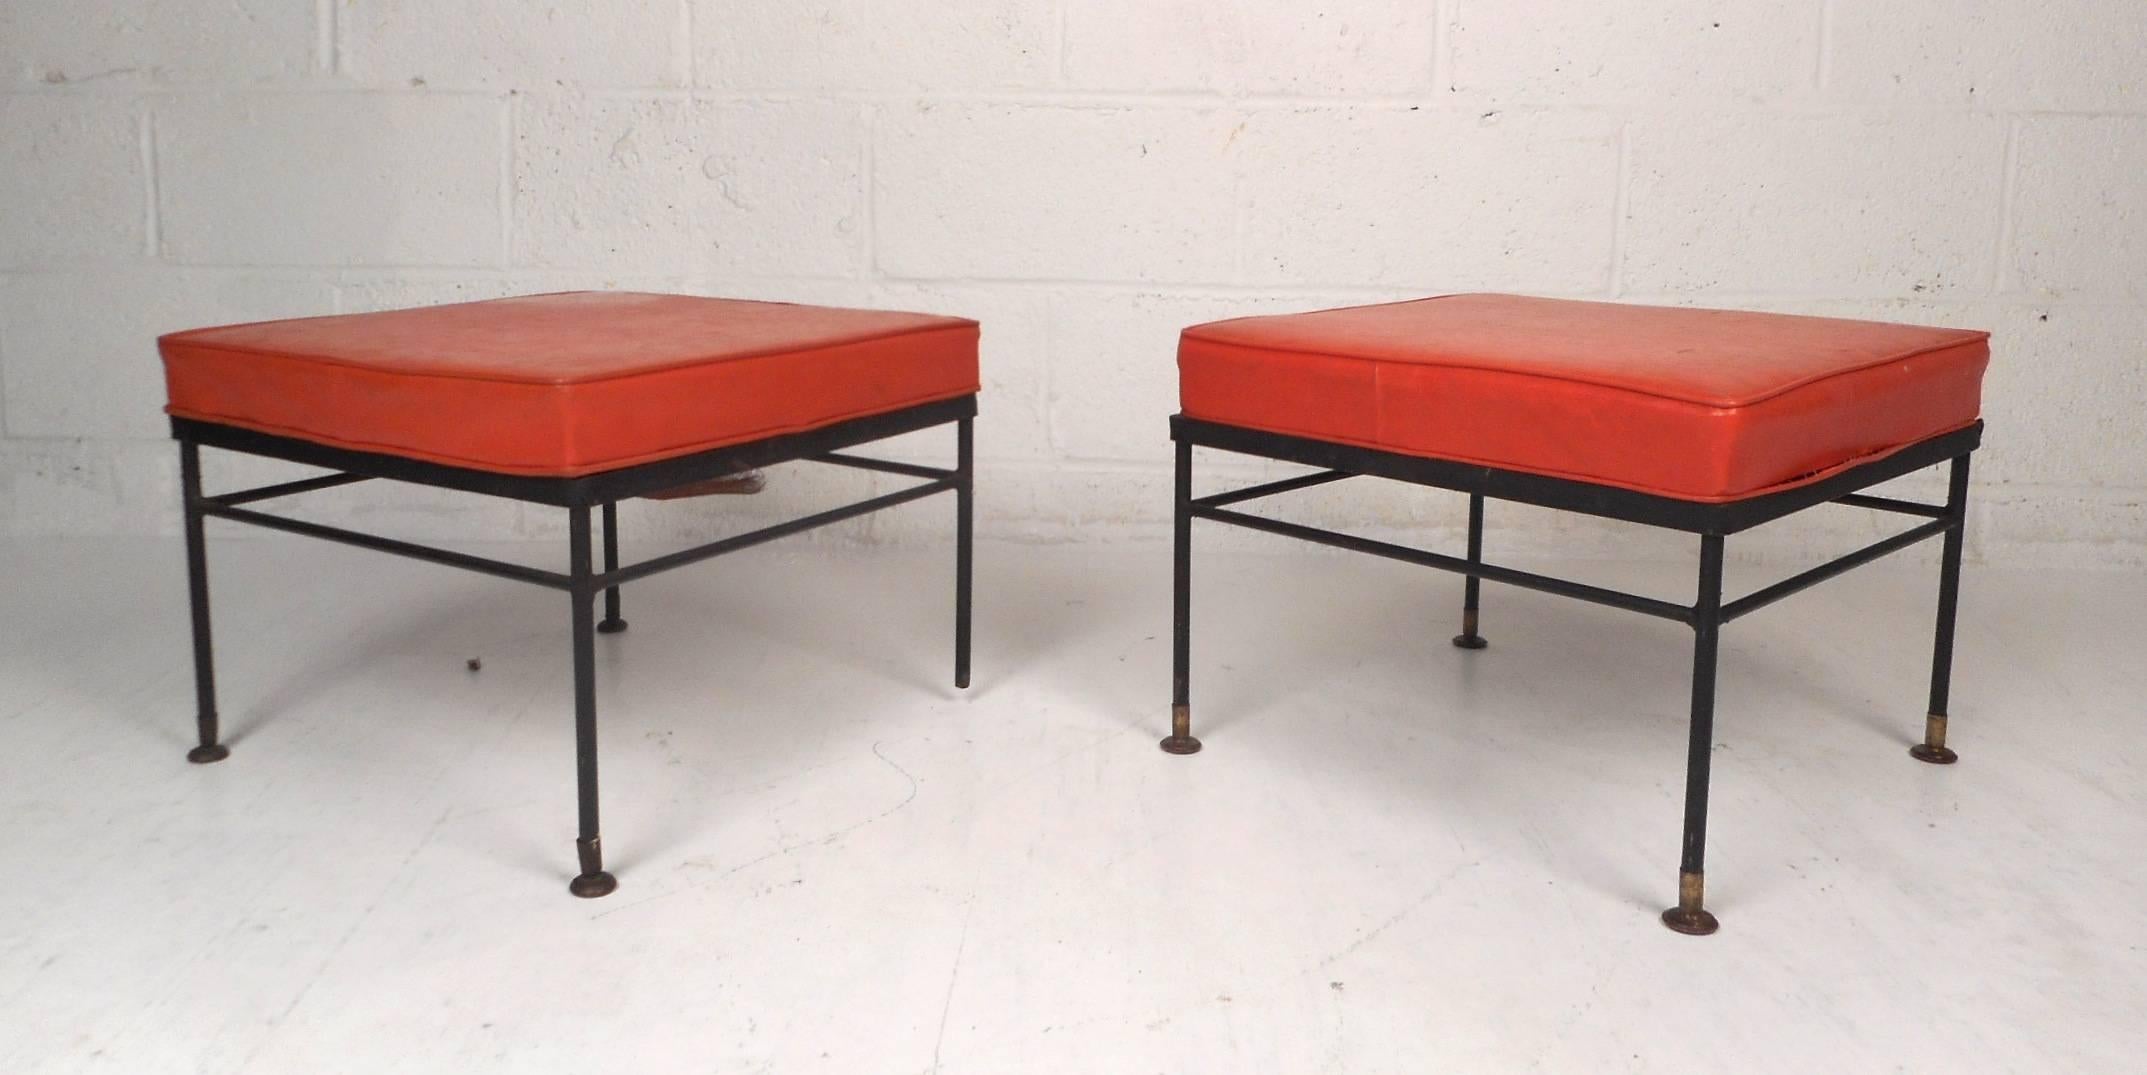 This lovely pair of vintage ottomans feature a unique iron base with a thick padded cushion on top covered in elaborate orange vinyl. This wonderful pair of midcentury stools make the perfect addition to any modern interior. Please confirm item